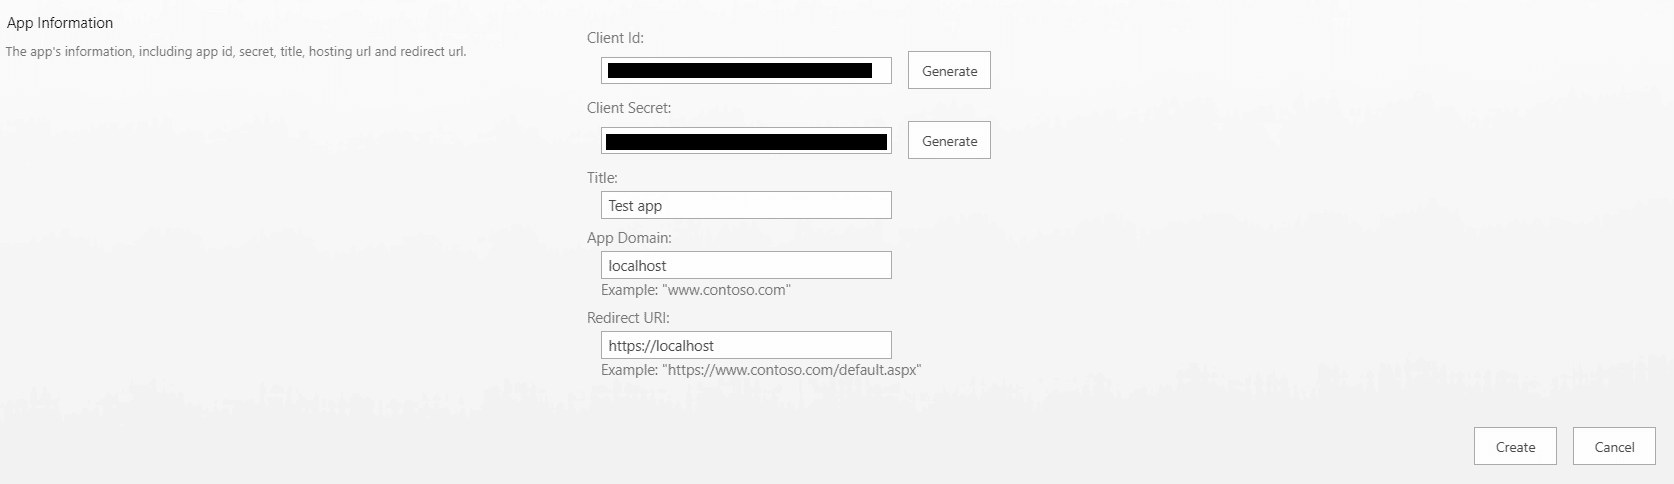 Connect through SharePoint - App Add-In